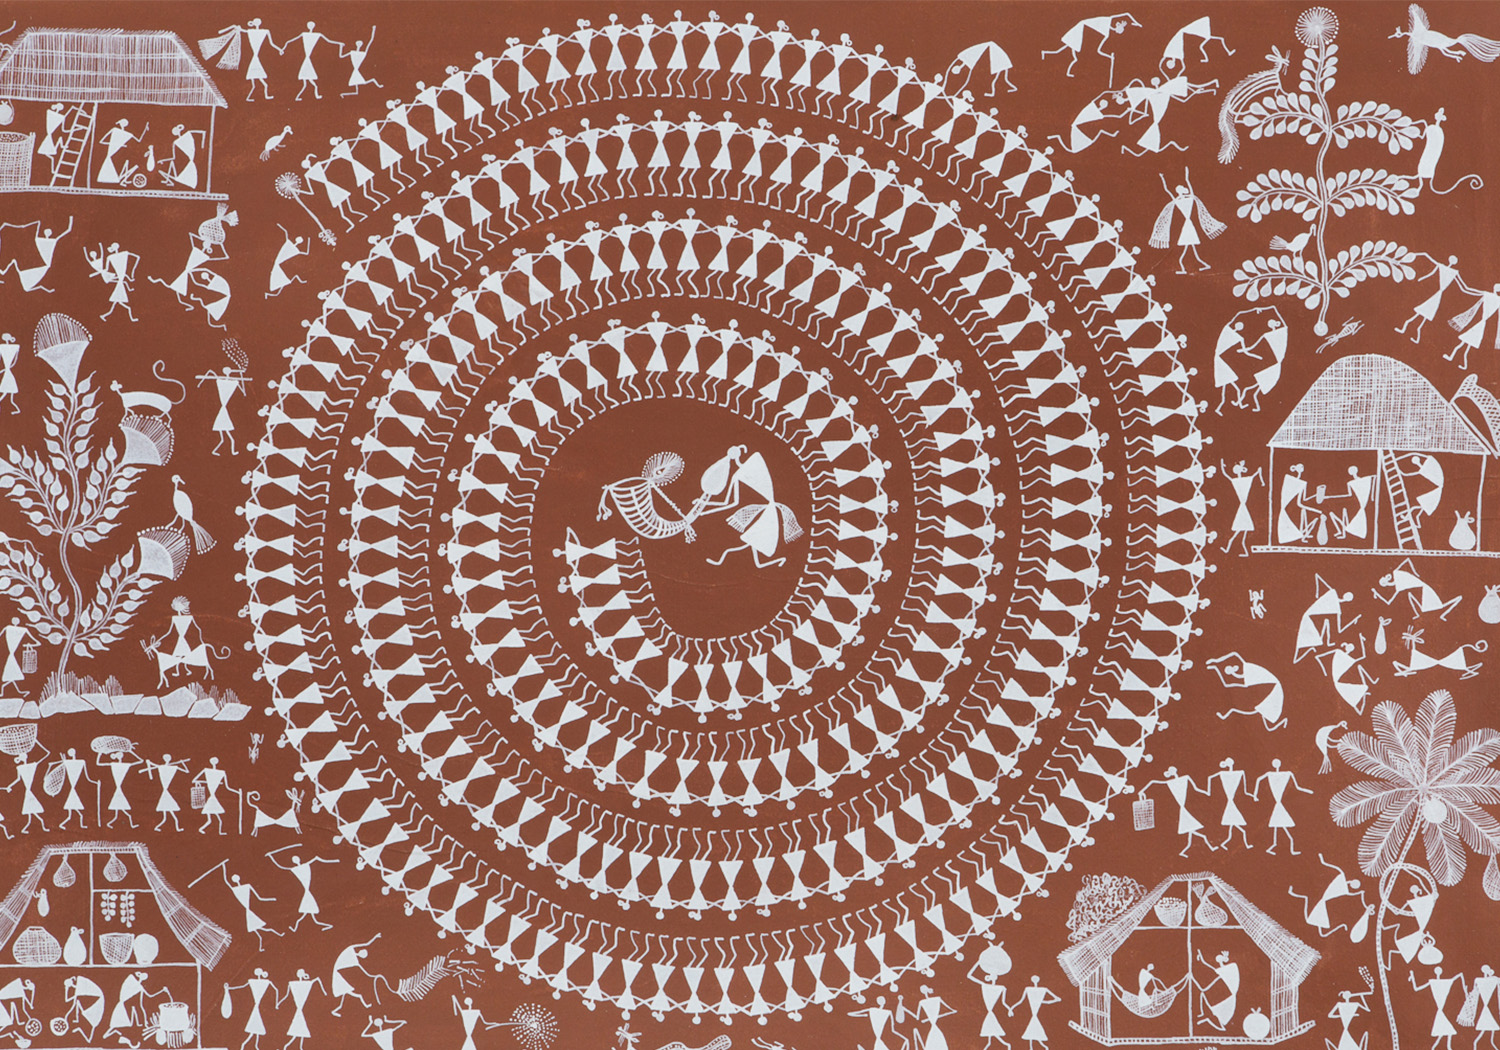 A Warli painting depicting the celebrations on the festival of Diwali, with a spiral tarpa dance at its centre.